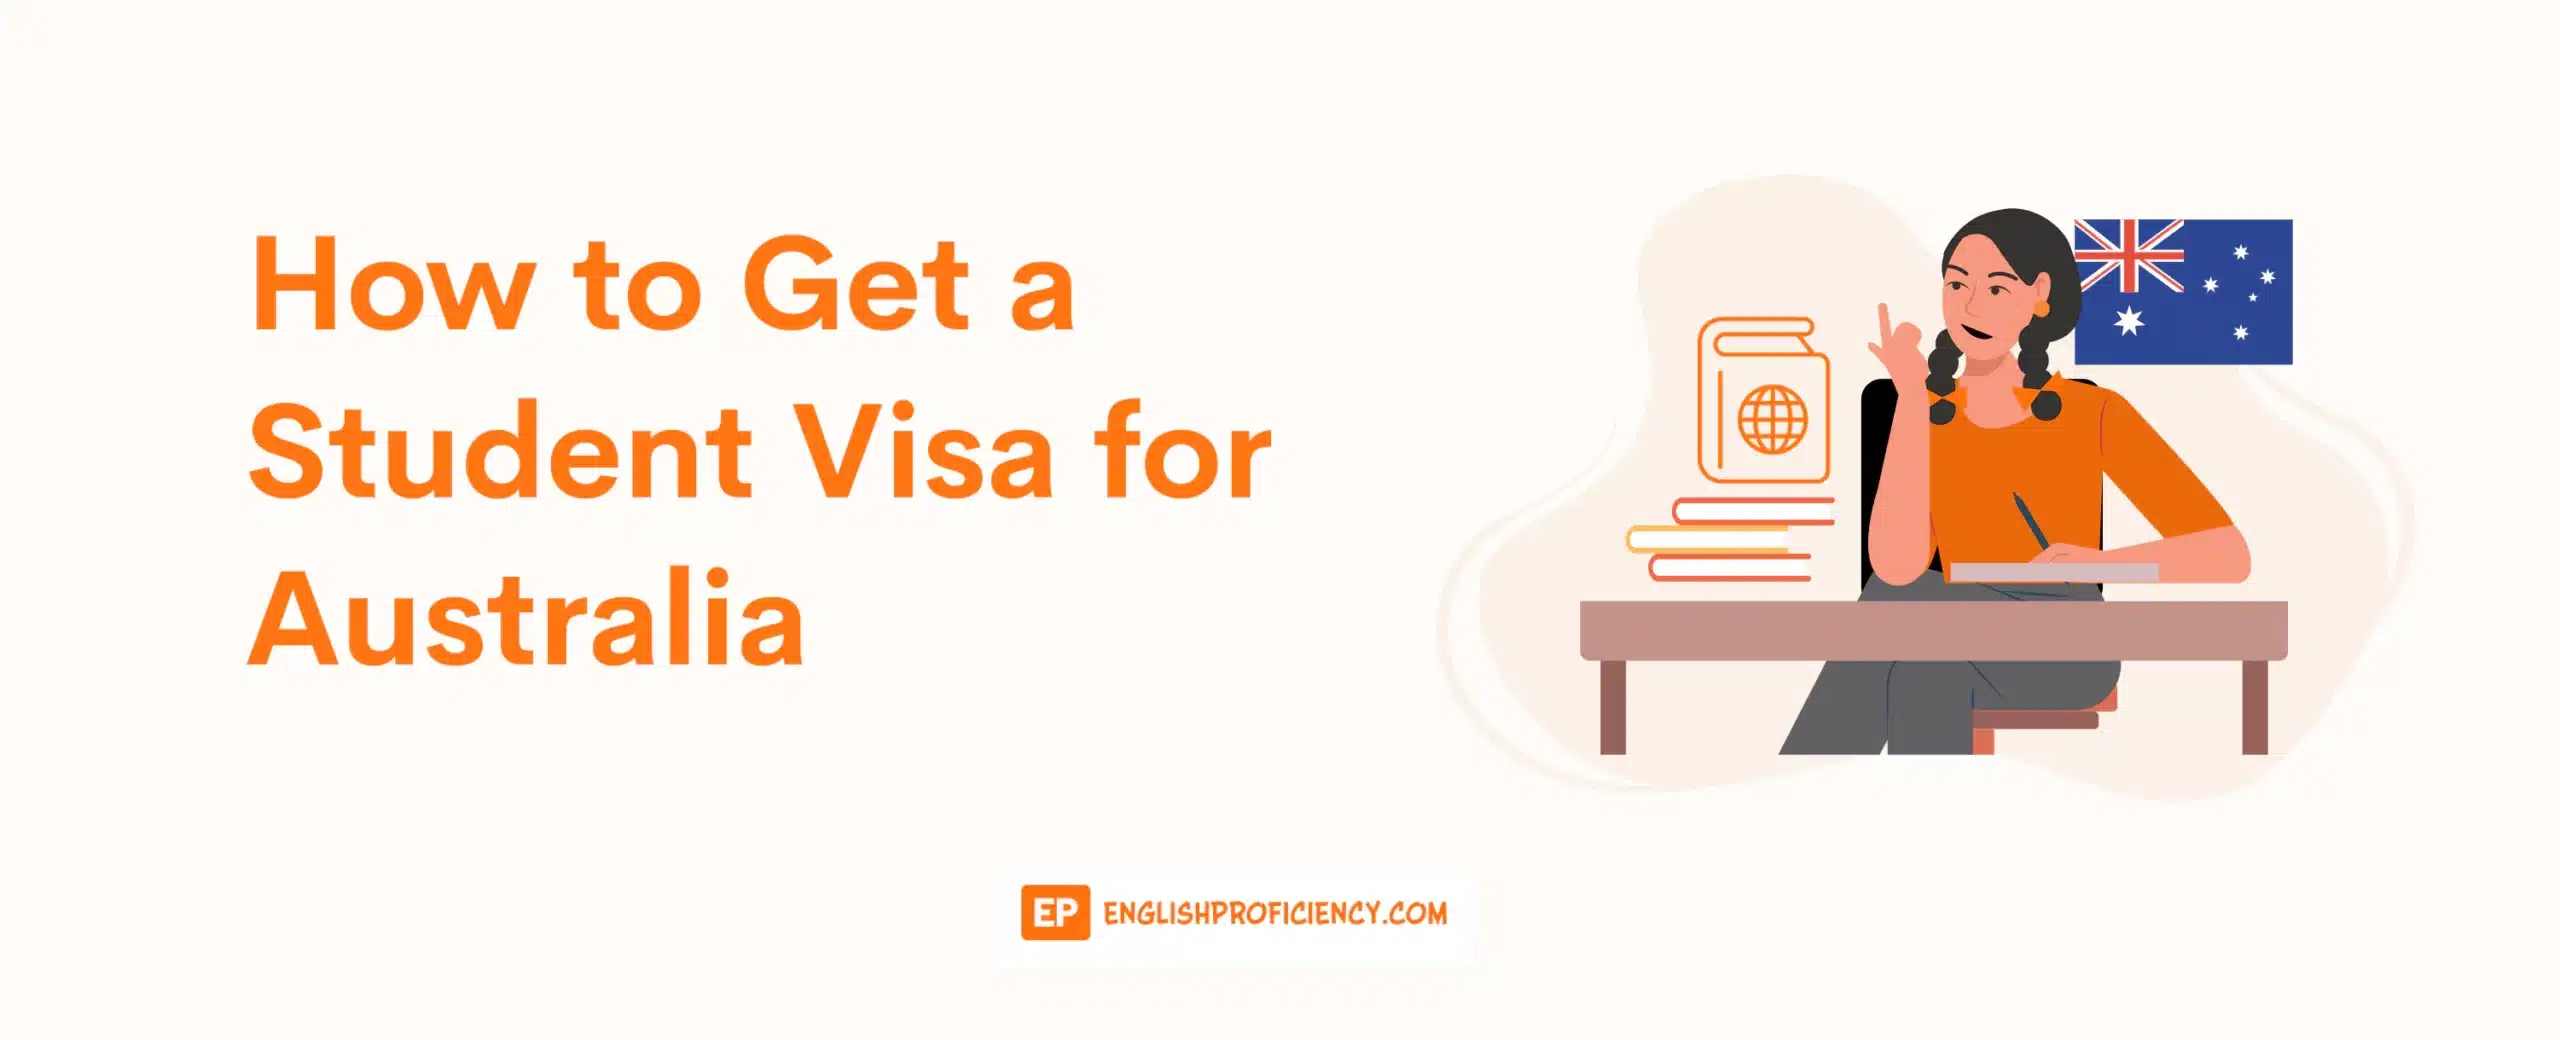 How to Get a Student Visa for Australia